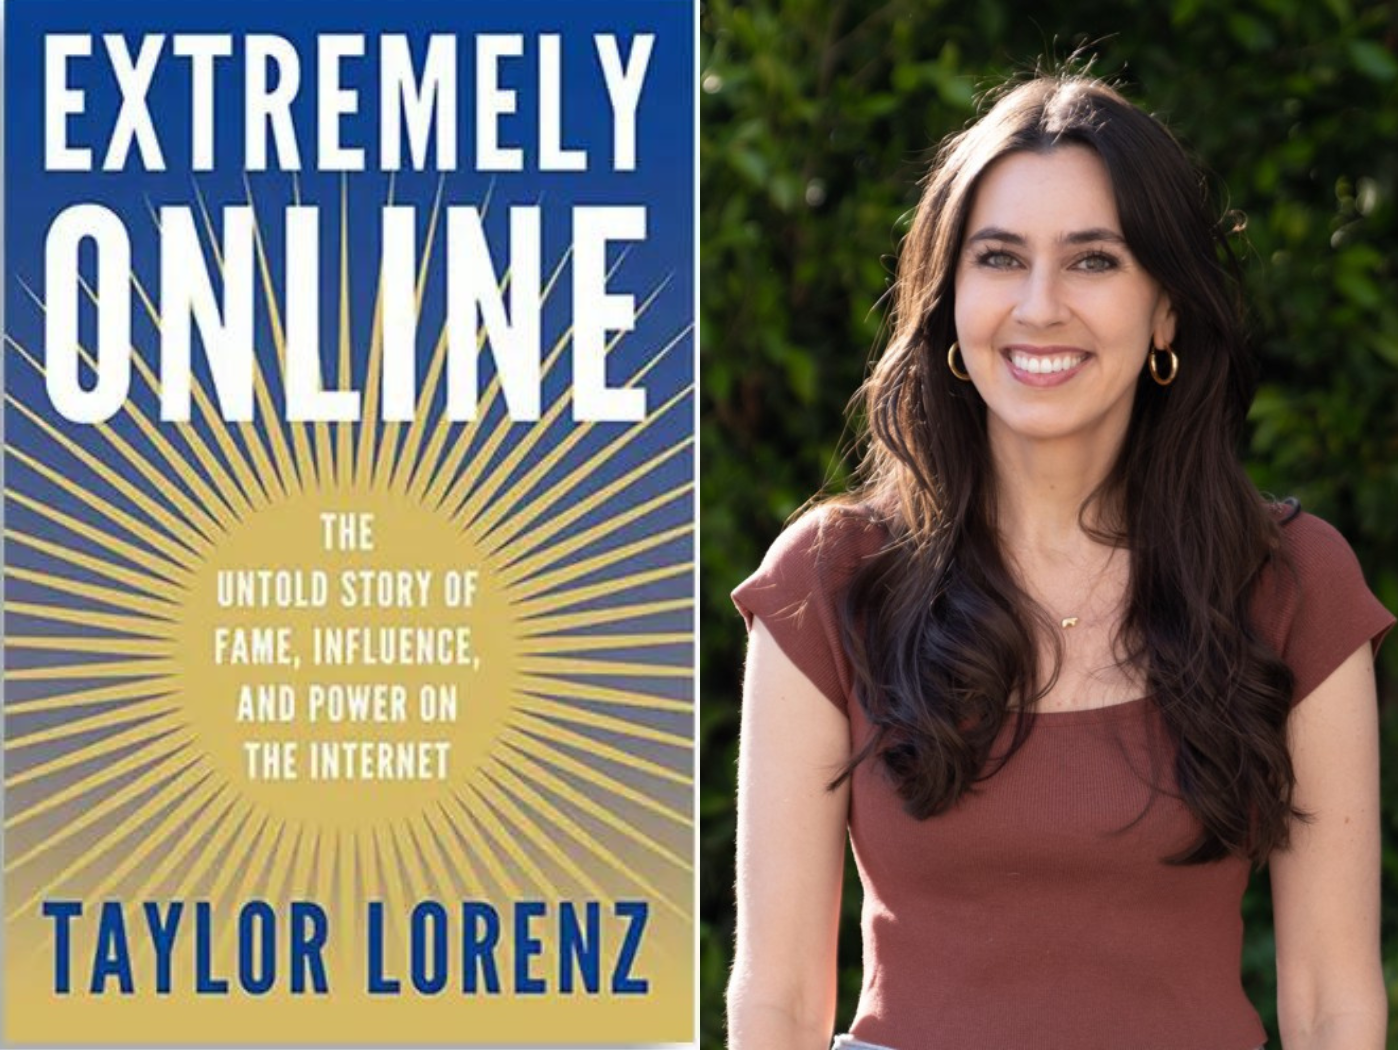 Taylor Lorenz Extremely Online The Untold Story of Fame, Influence, and the Power of the Internet